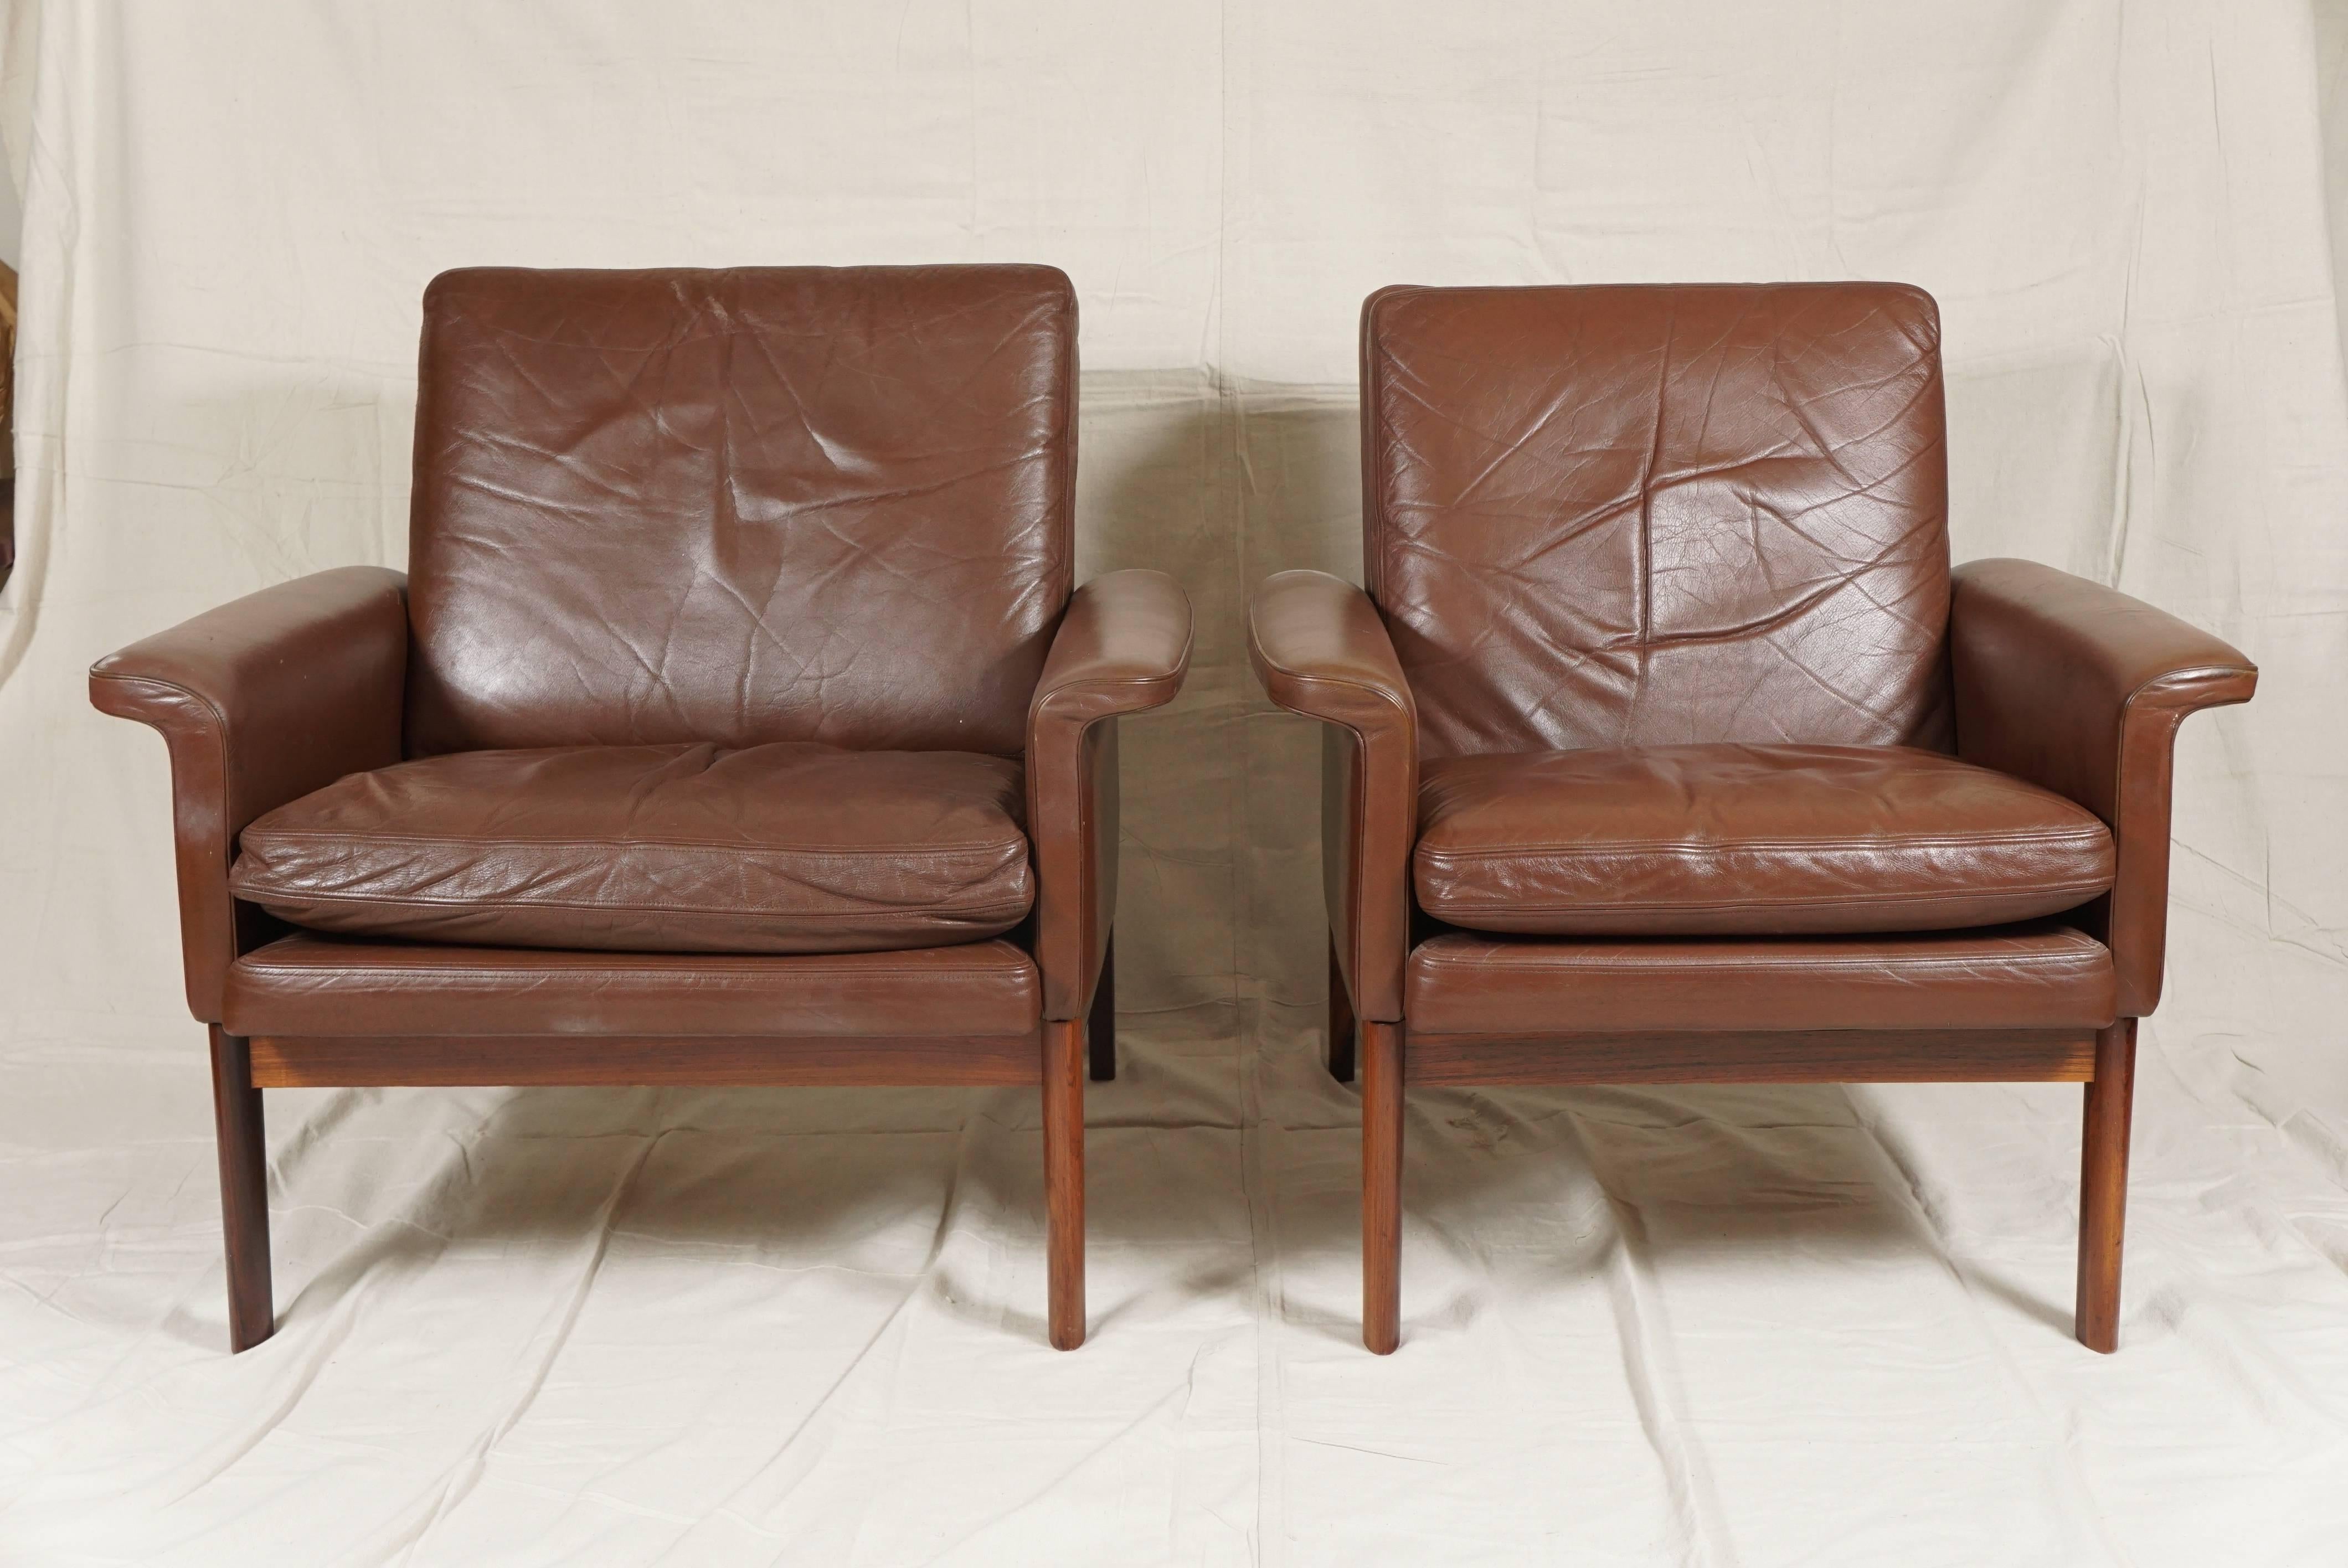 Elegant pair of Danish modern leather armchairs in the style of Finn Juhl covered in high quality soft brown leather with rosewood frames.